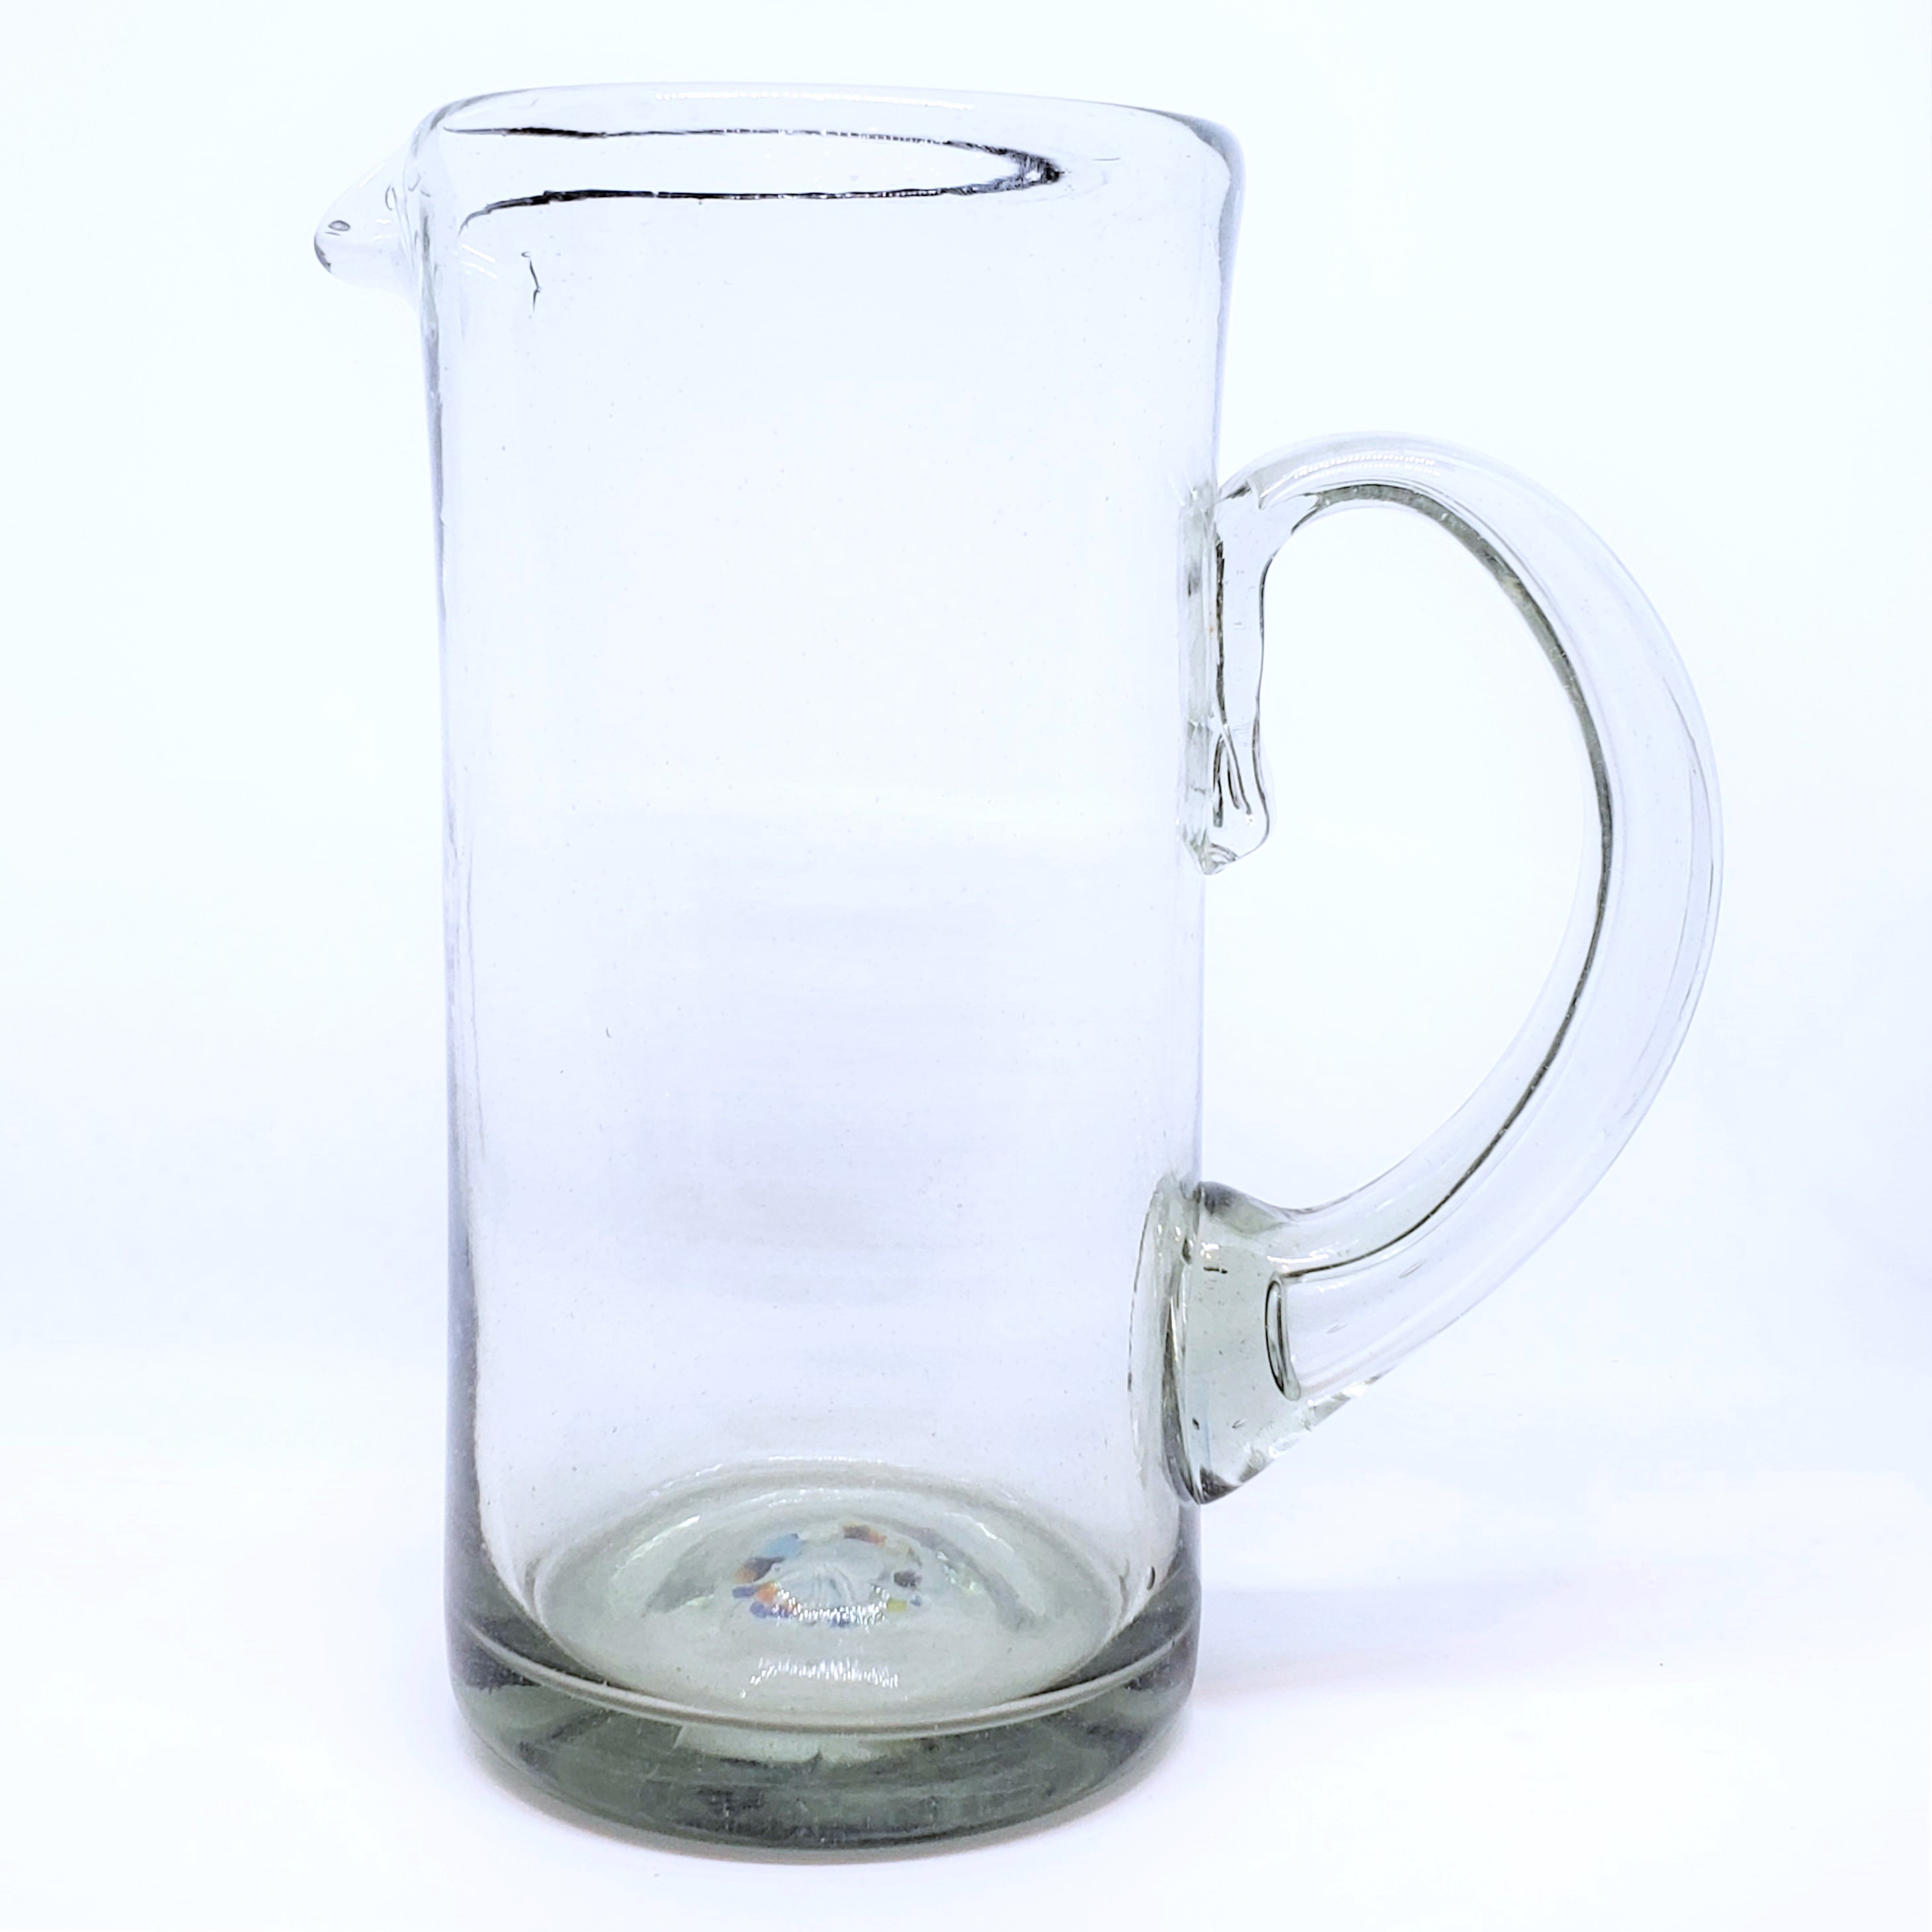 New Items / Clear 60 oz Tall Pitcher / Match your clear tumblers and glasses with this gorgeous rustic clear tall pitcher.